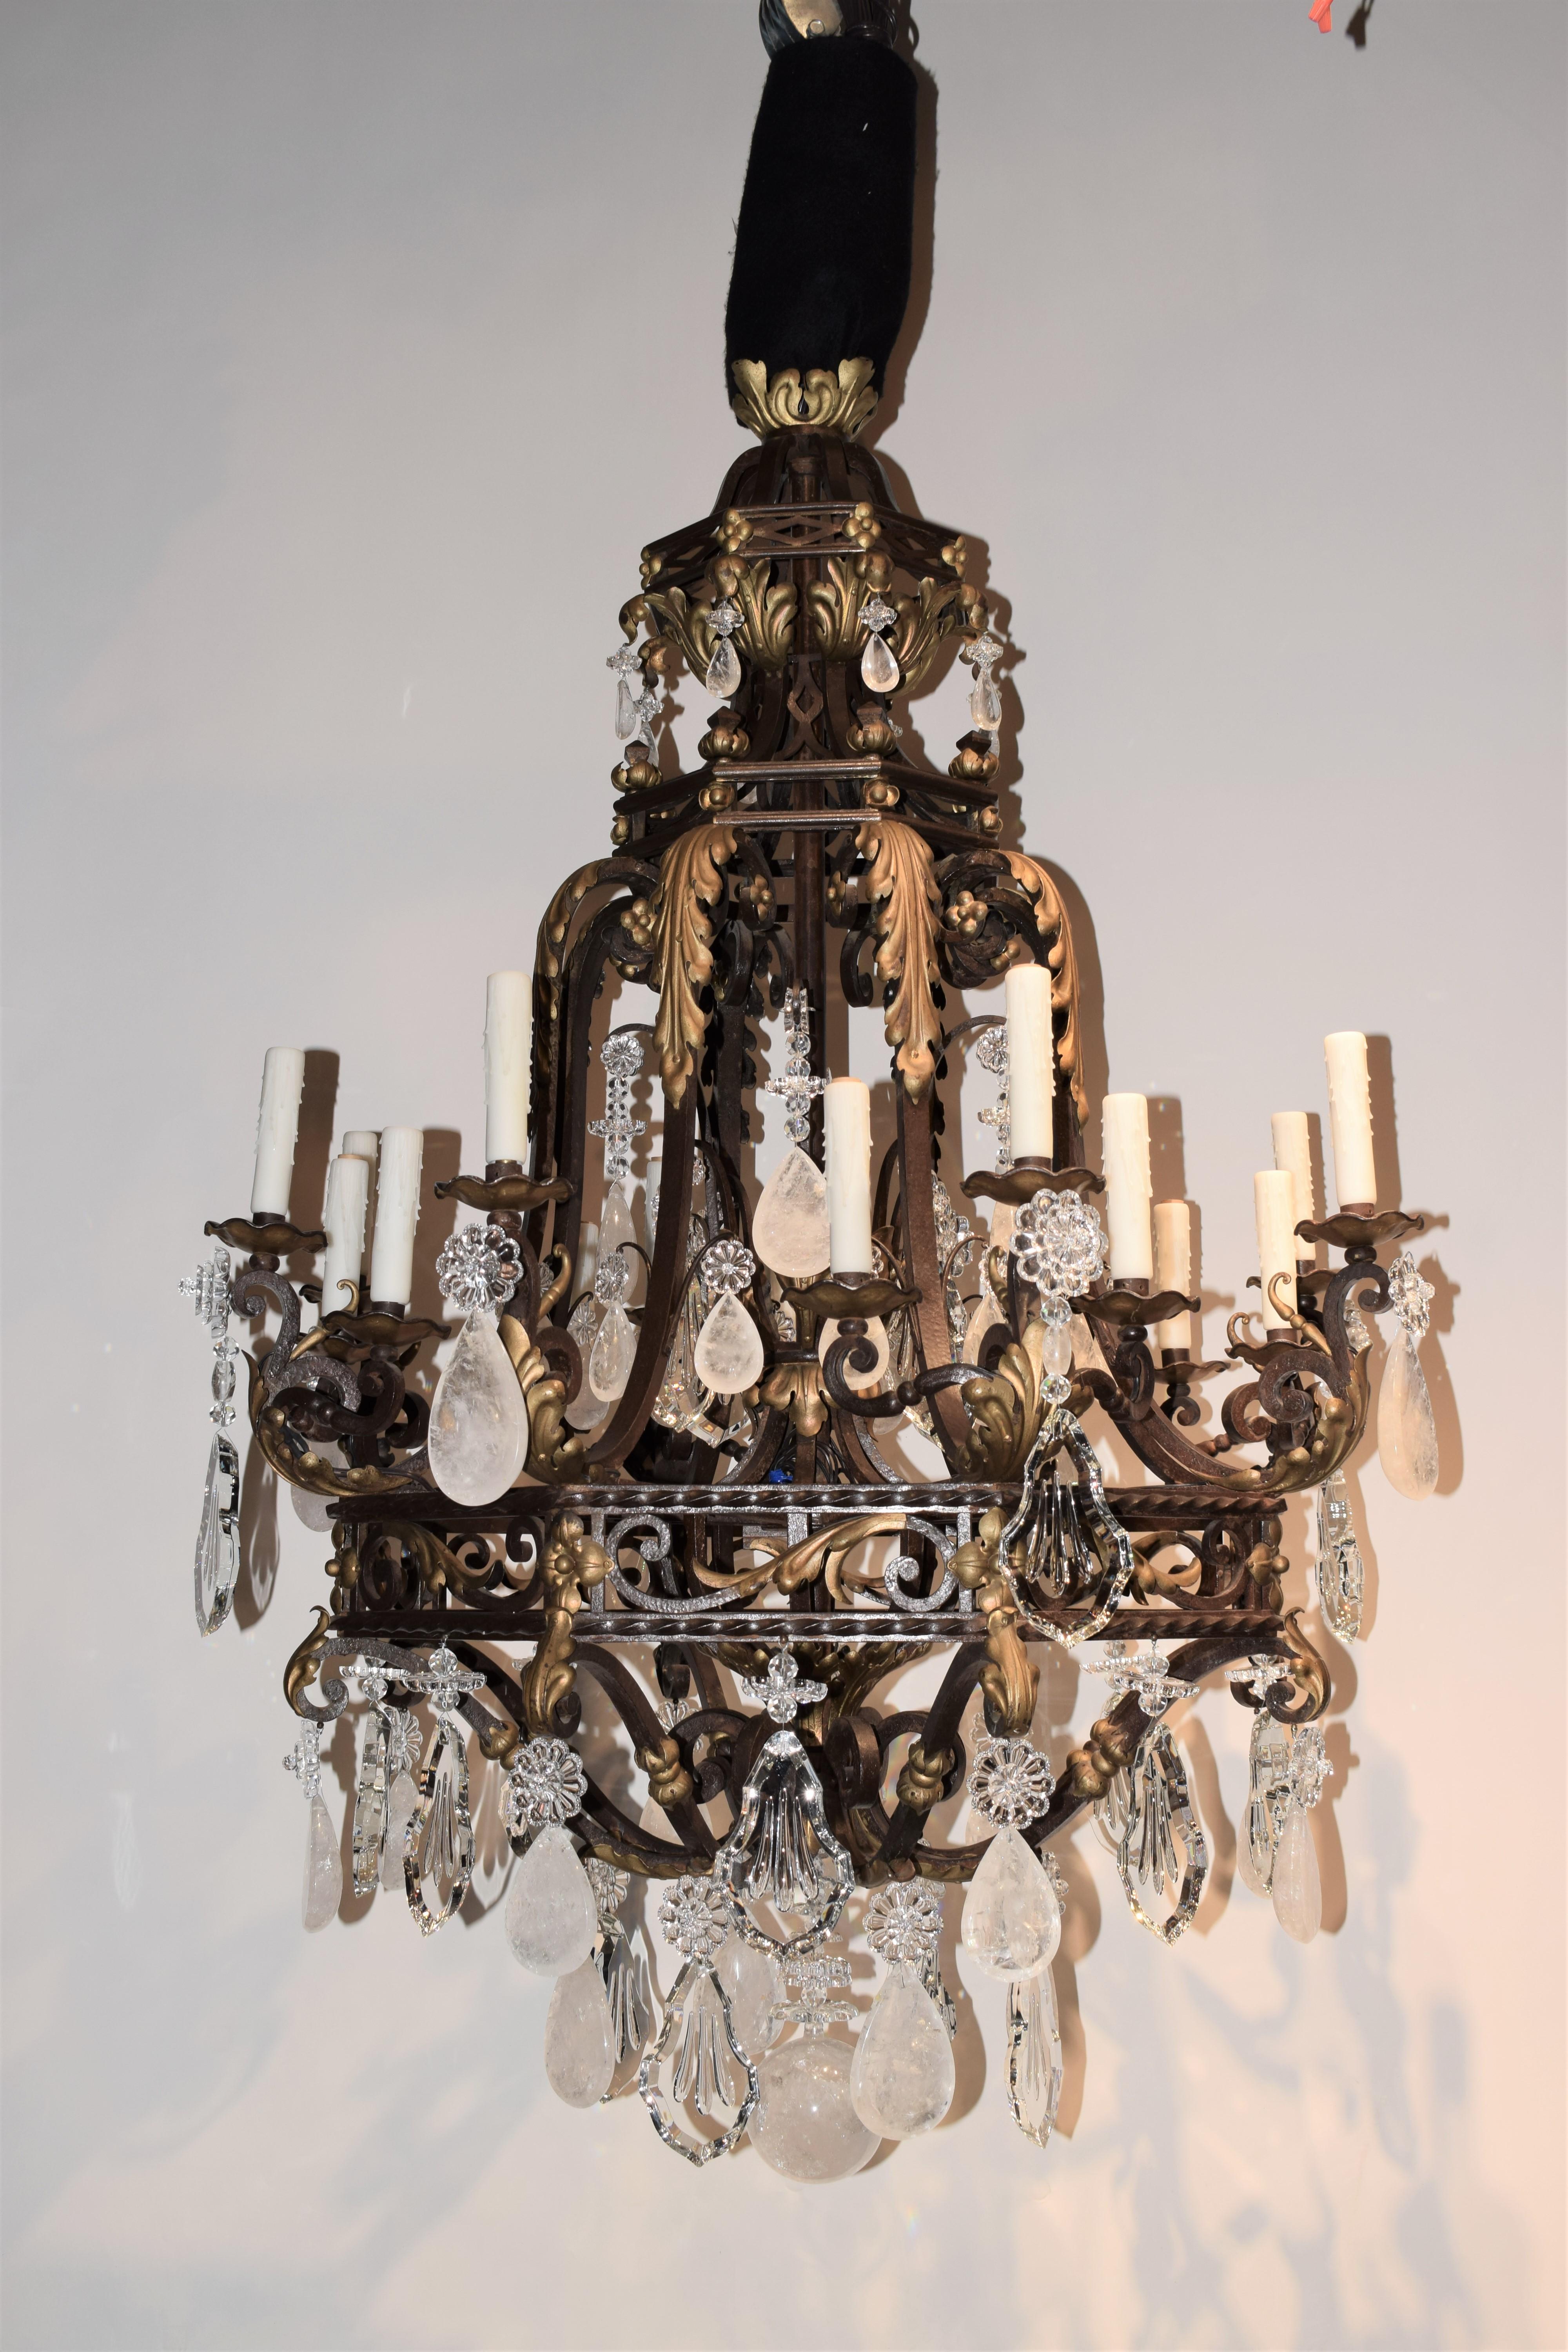 A Magnificent Hand Hammered iron chandelier. Gilt Reposse. Acanthus leaves throughout. Crystal & Rock Crystal Pendalogues. France, circa 1890. 16 lights. 
Dimensions: Height 57